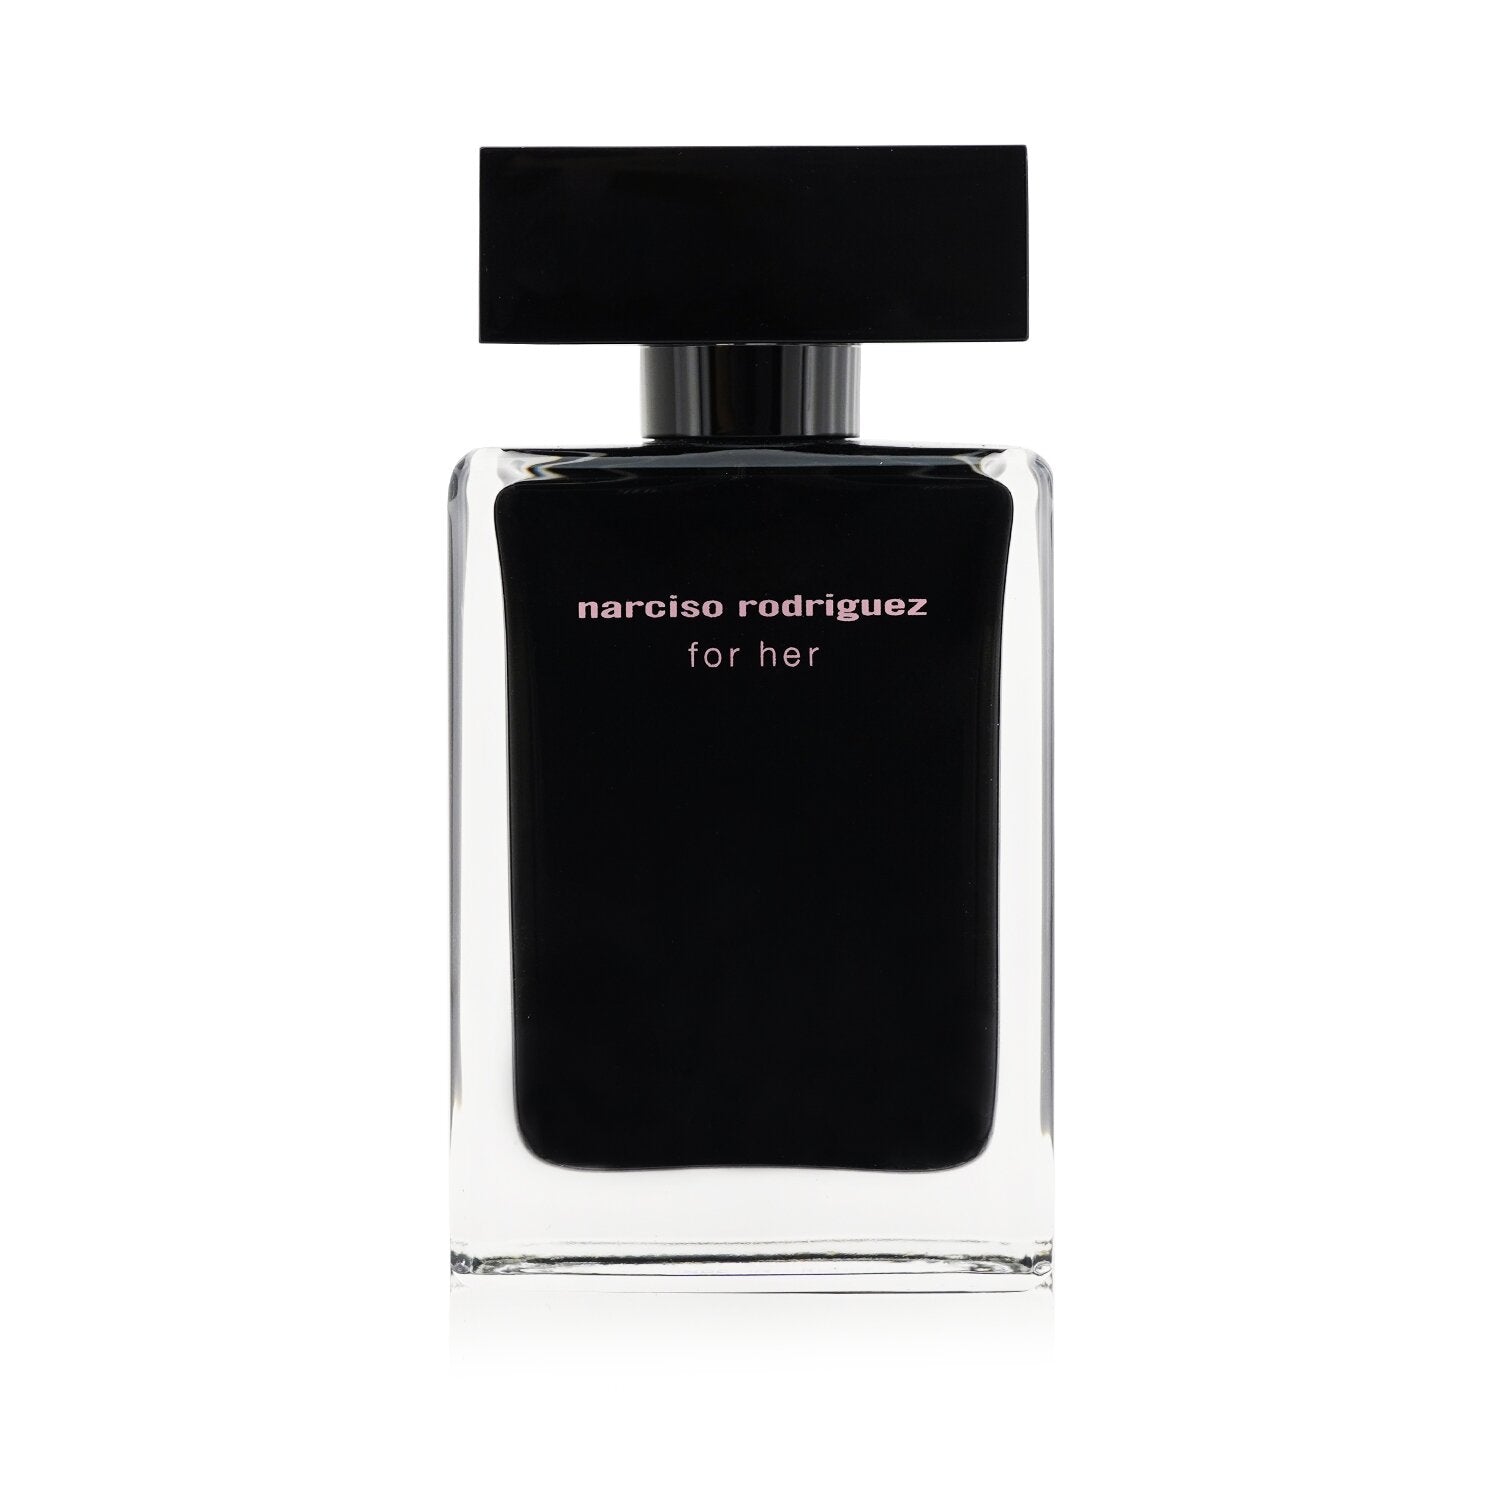 Narciso Rodriguez by Narciso Rodriguez - Buy online